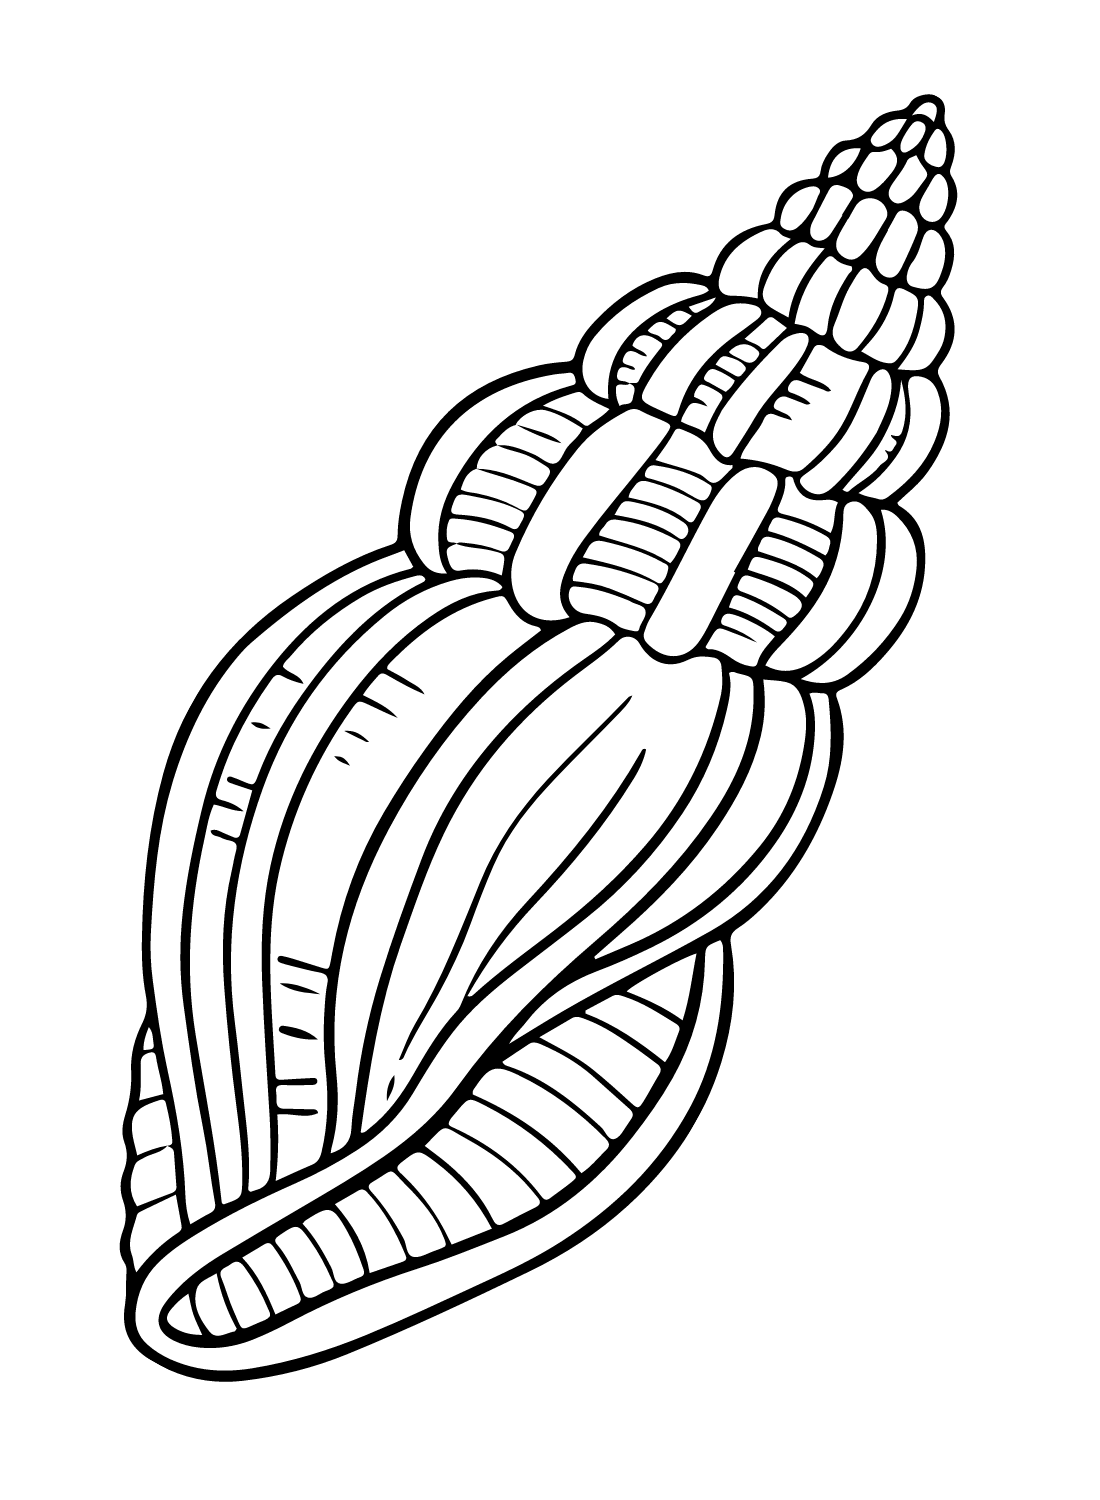 Sea snail coloring pages printable for free download